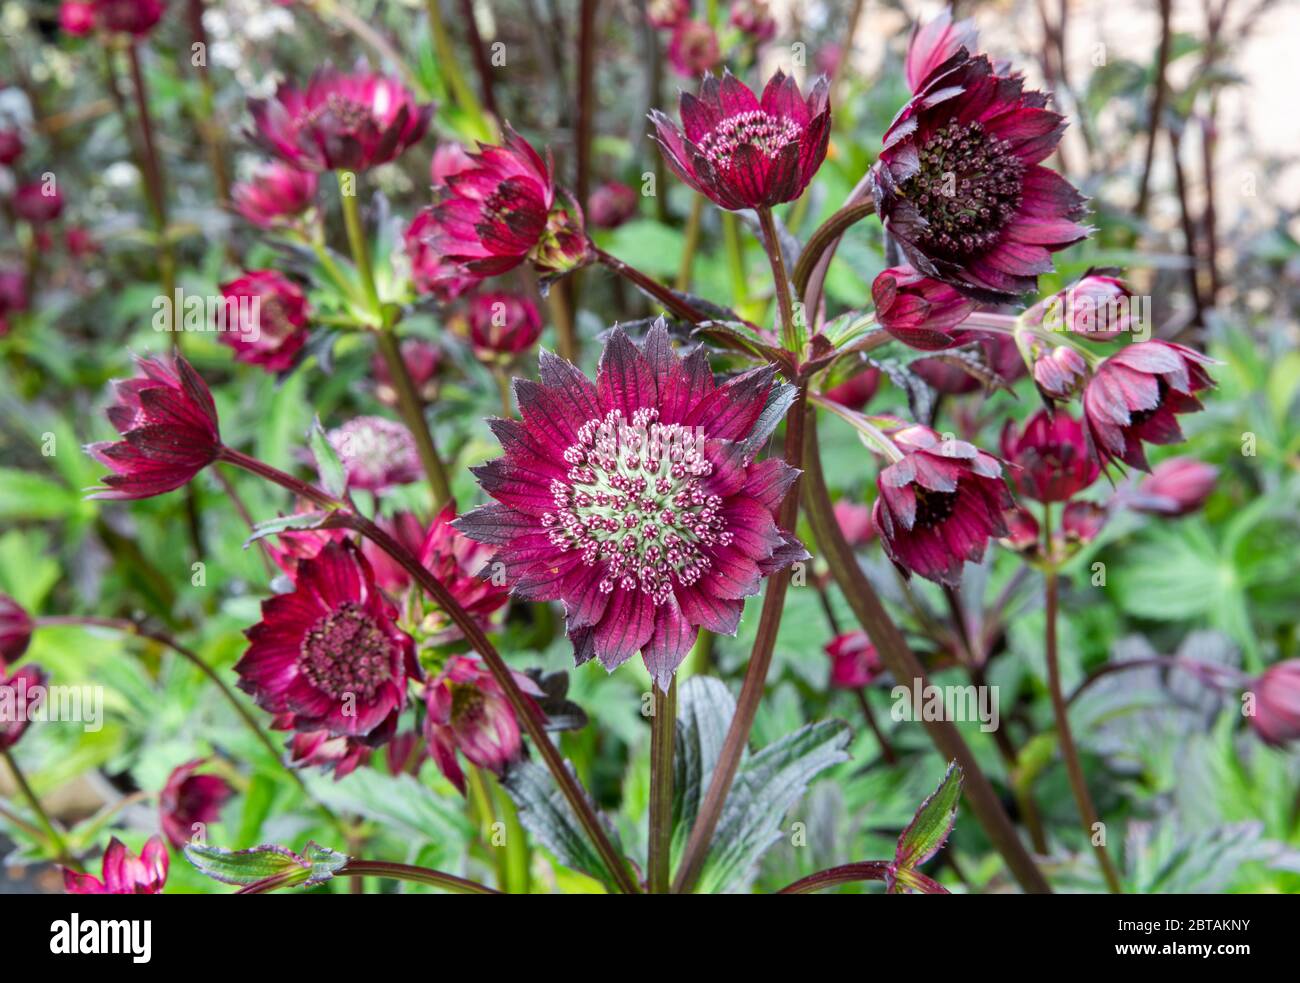 Closeup of crimson red Astrantia major 'Gill Richardson', masterwort. Red, green, purple flowers, with blurred flowers and foliage in background. Stock Photo